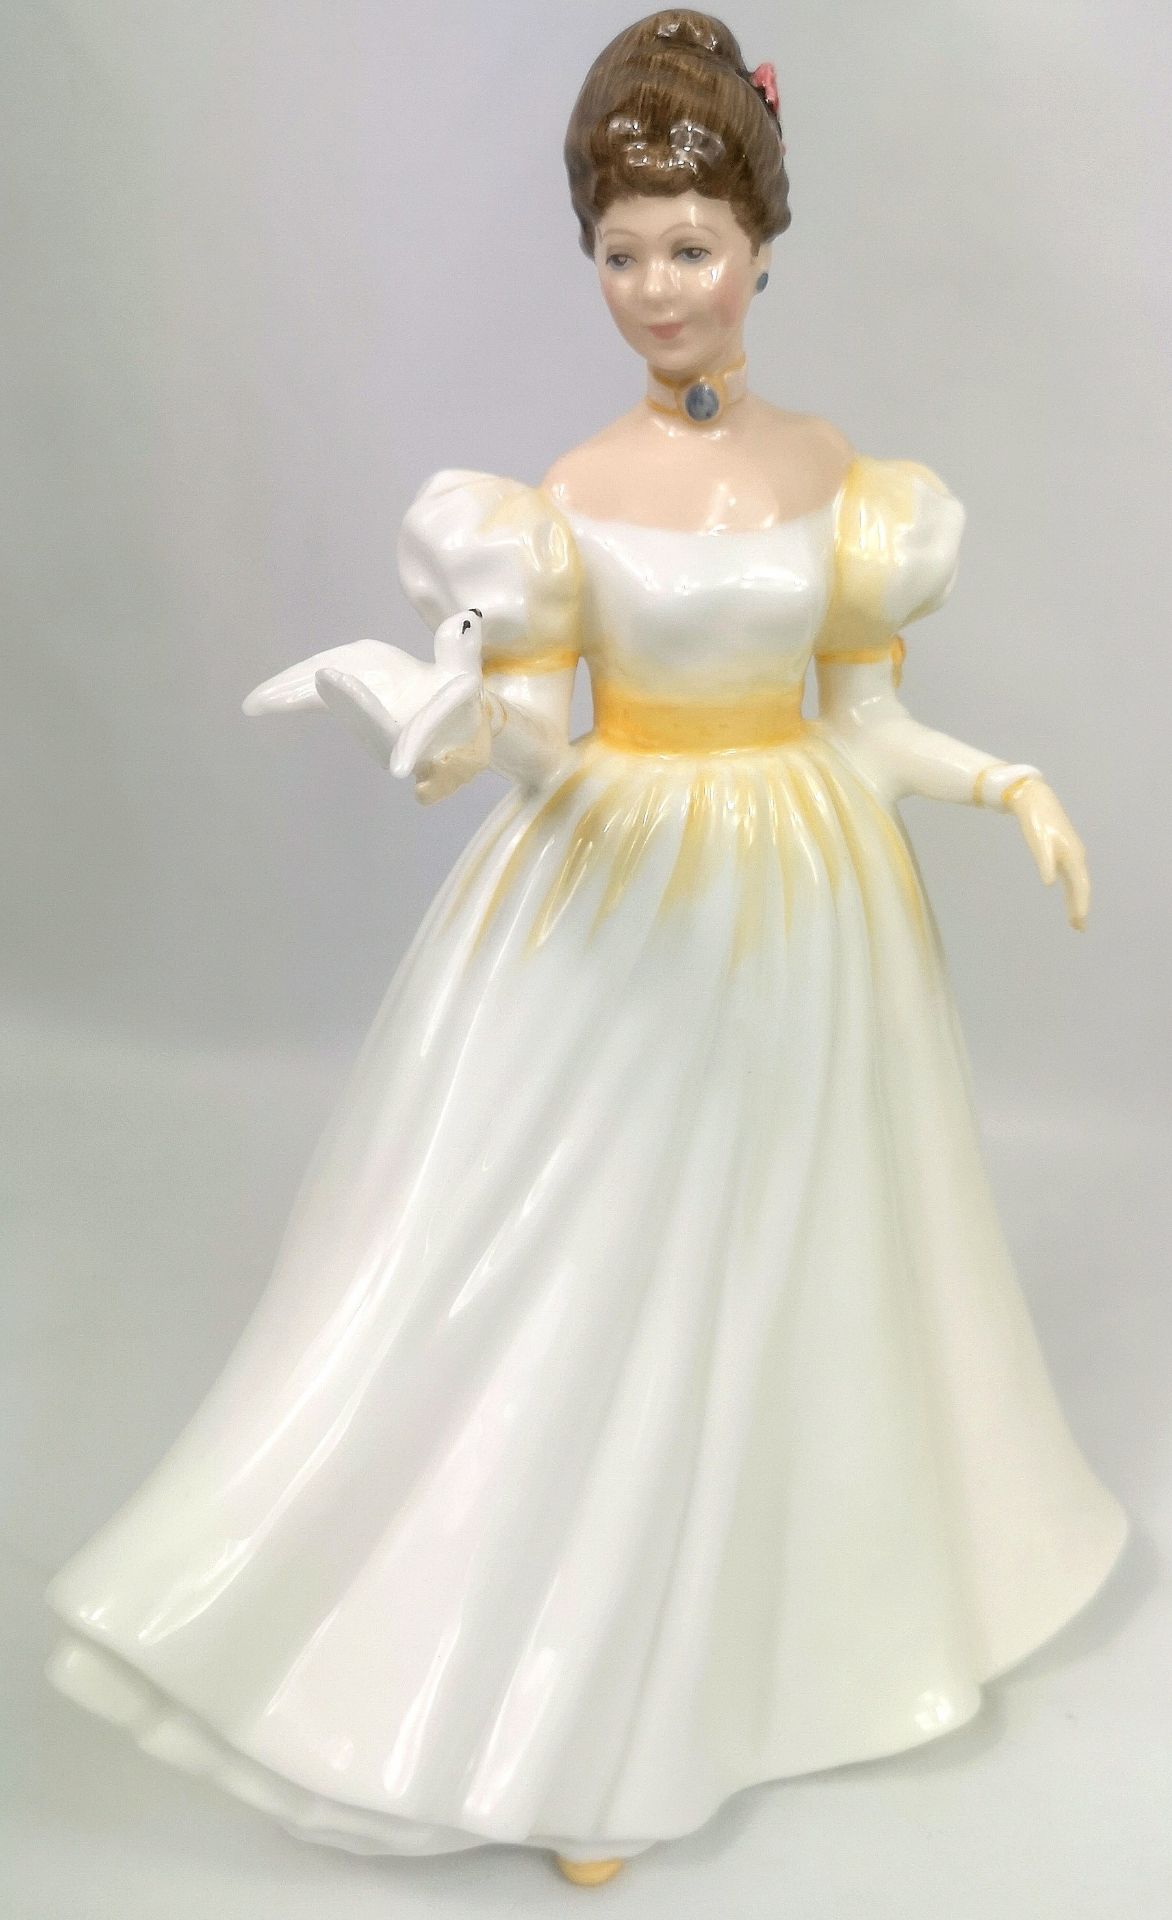 Six Royal Doulton figurines - Image 2 of 13